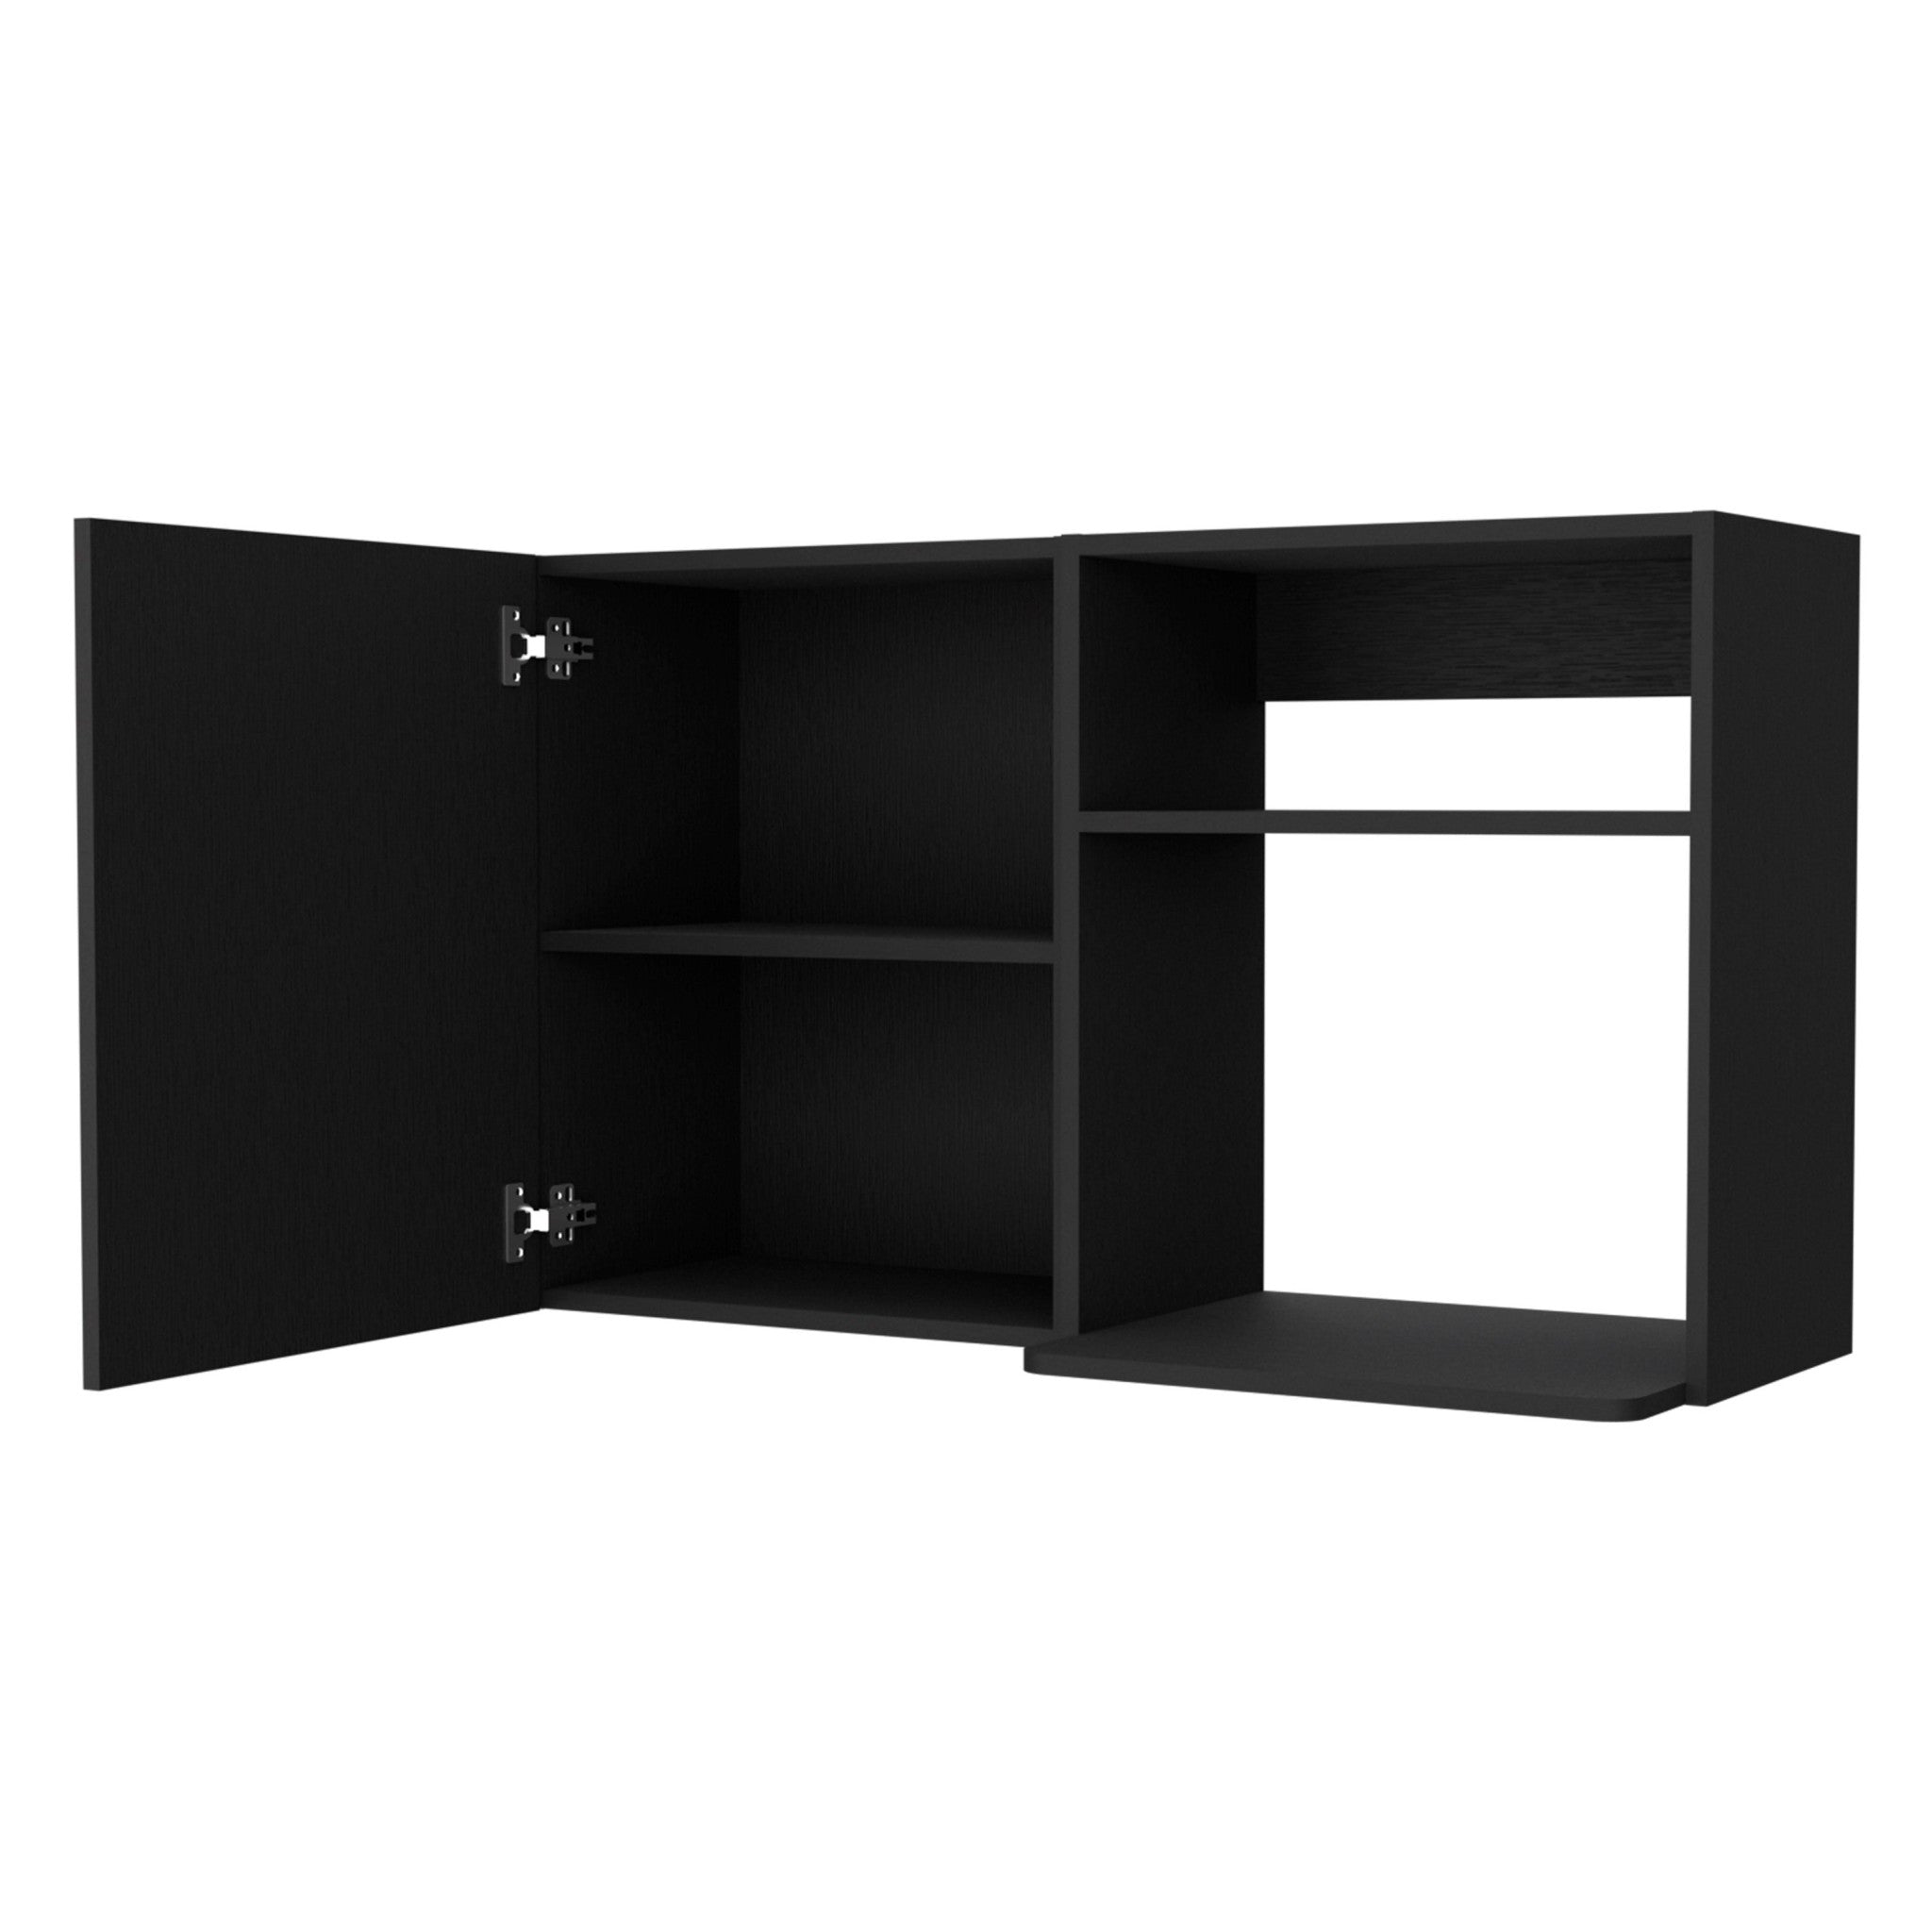 39" Black Accent Cabinet With Two Shelves